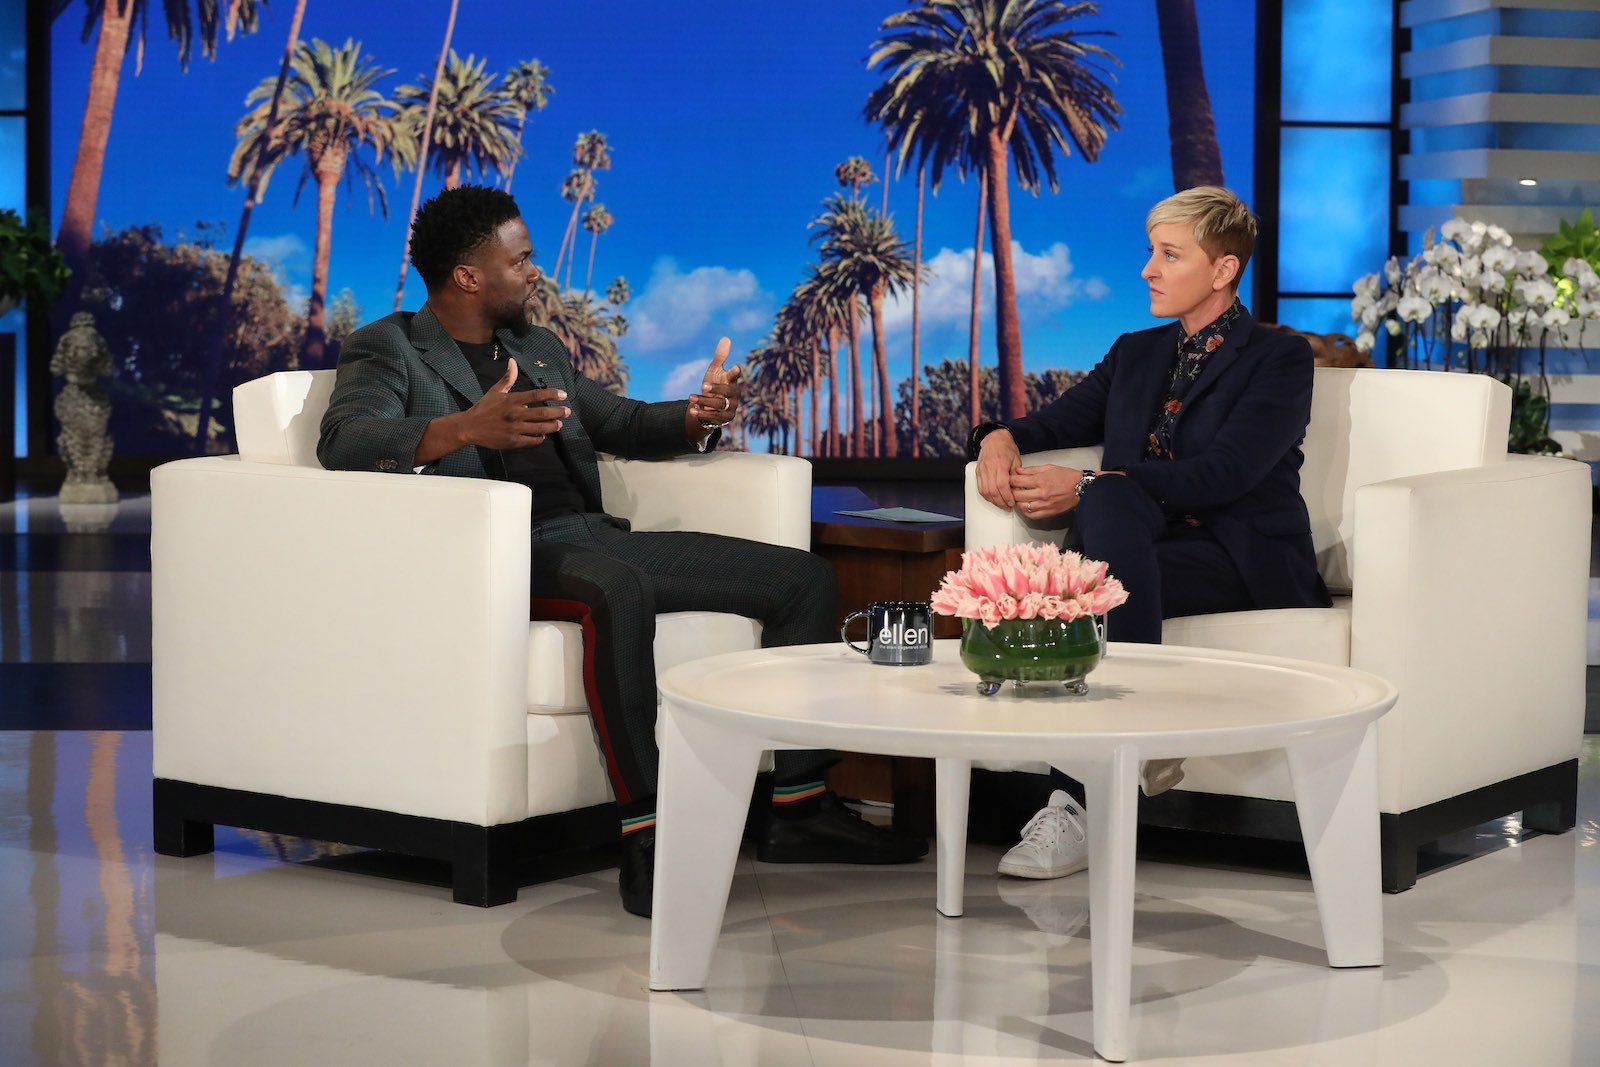 If you're looking to get tickets to 'The Ellen Show' after quarantine, we'd advised against it. Right now, the odds of the show staying on air aren't good. 